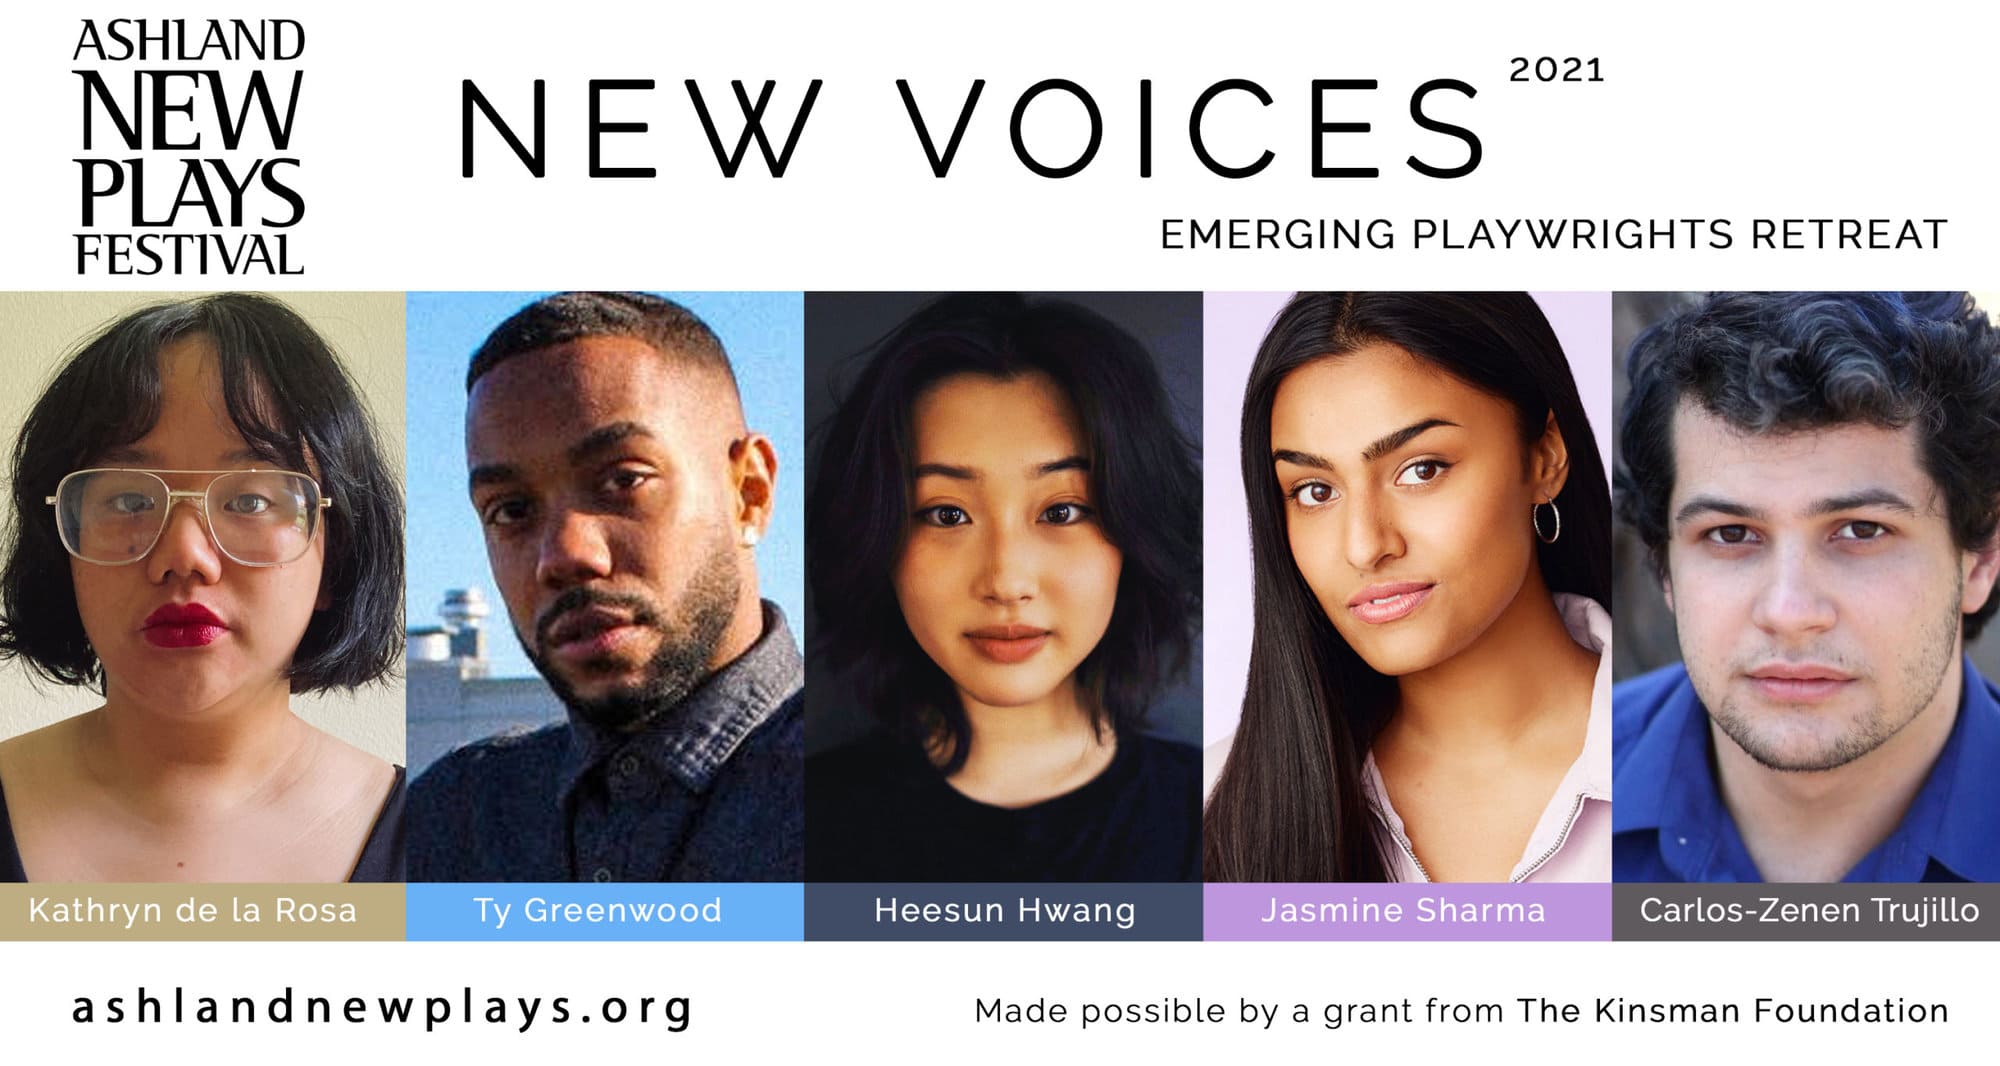 Ashland New Plays Festival New Voices Emerging Playwrights